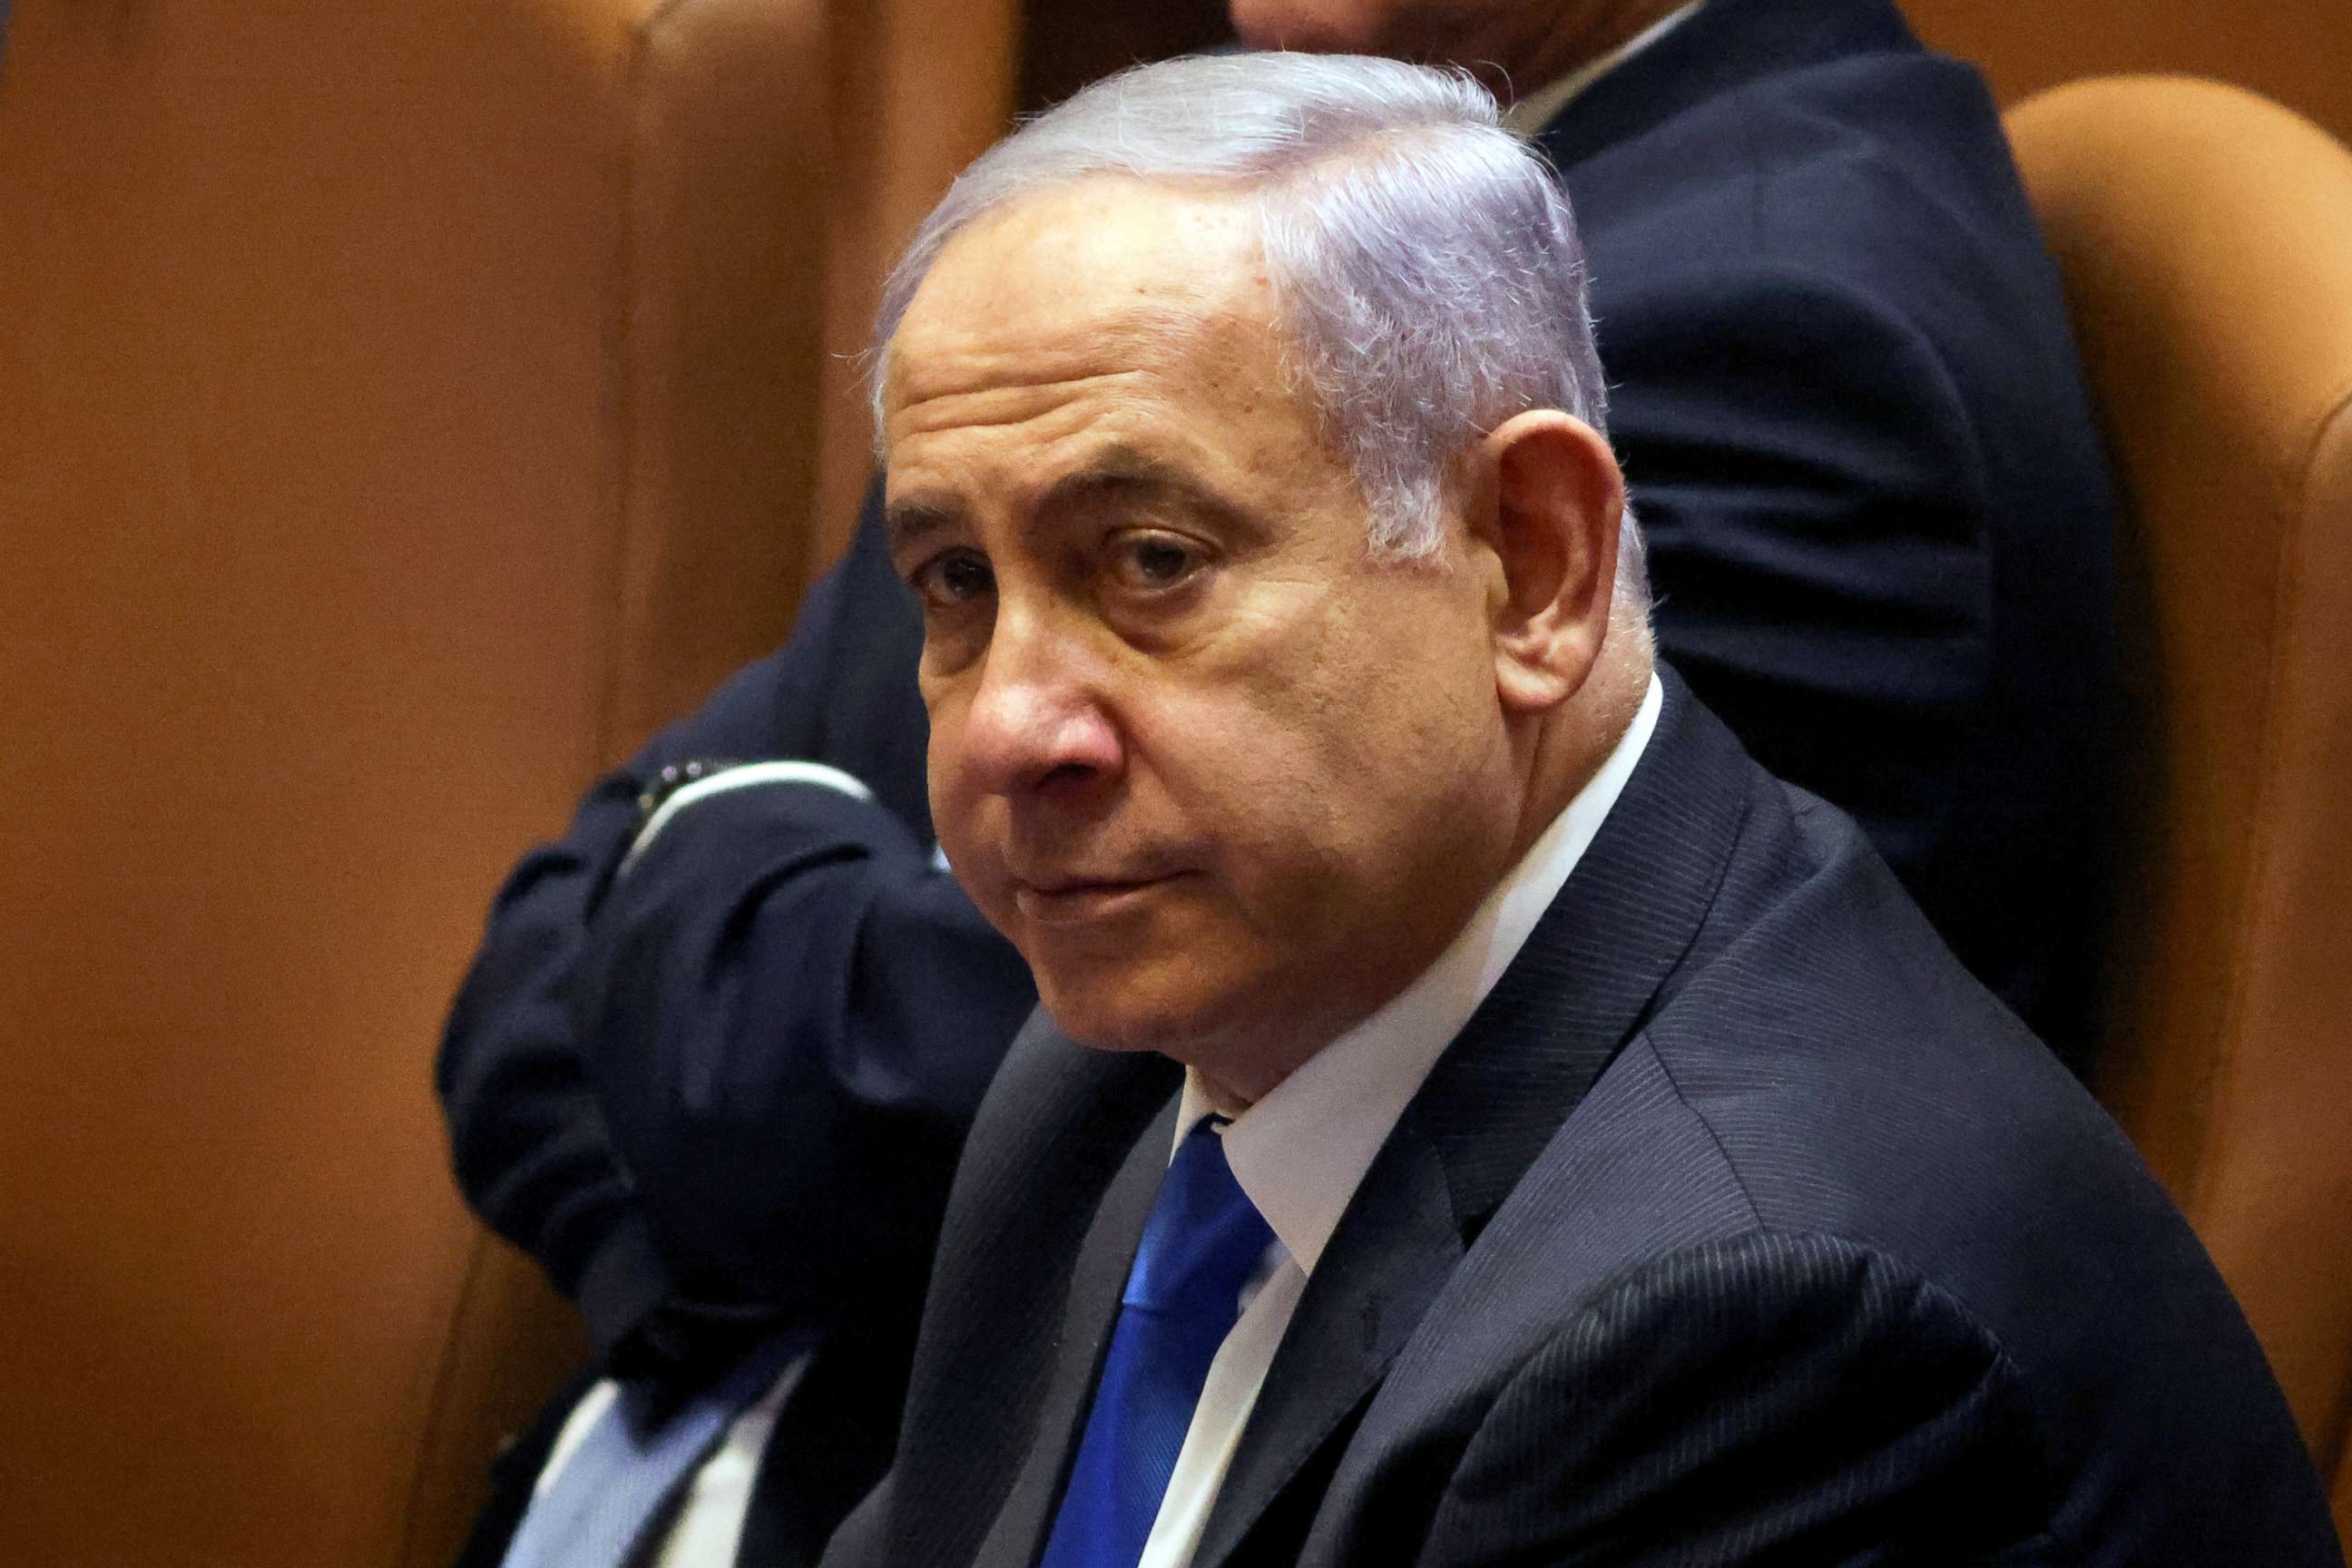 PHOTO: Israeli Prime Minister Benjamin Netanyahu looks on during a special session of the Knesset, Israel's parliament, in Jerusalem, June 13, 2021.